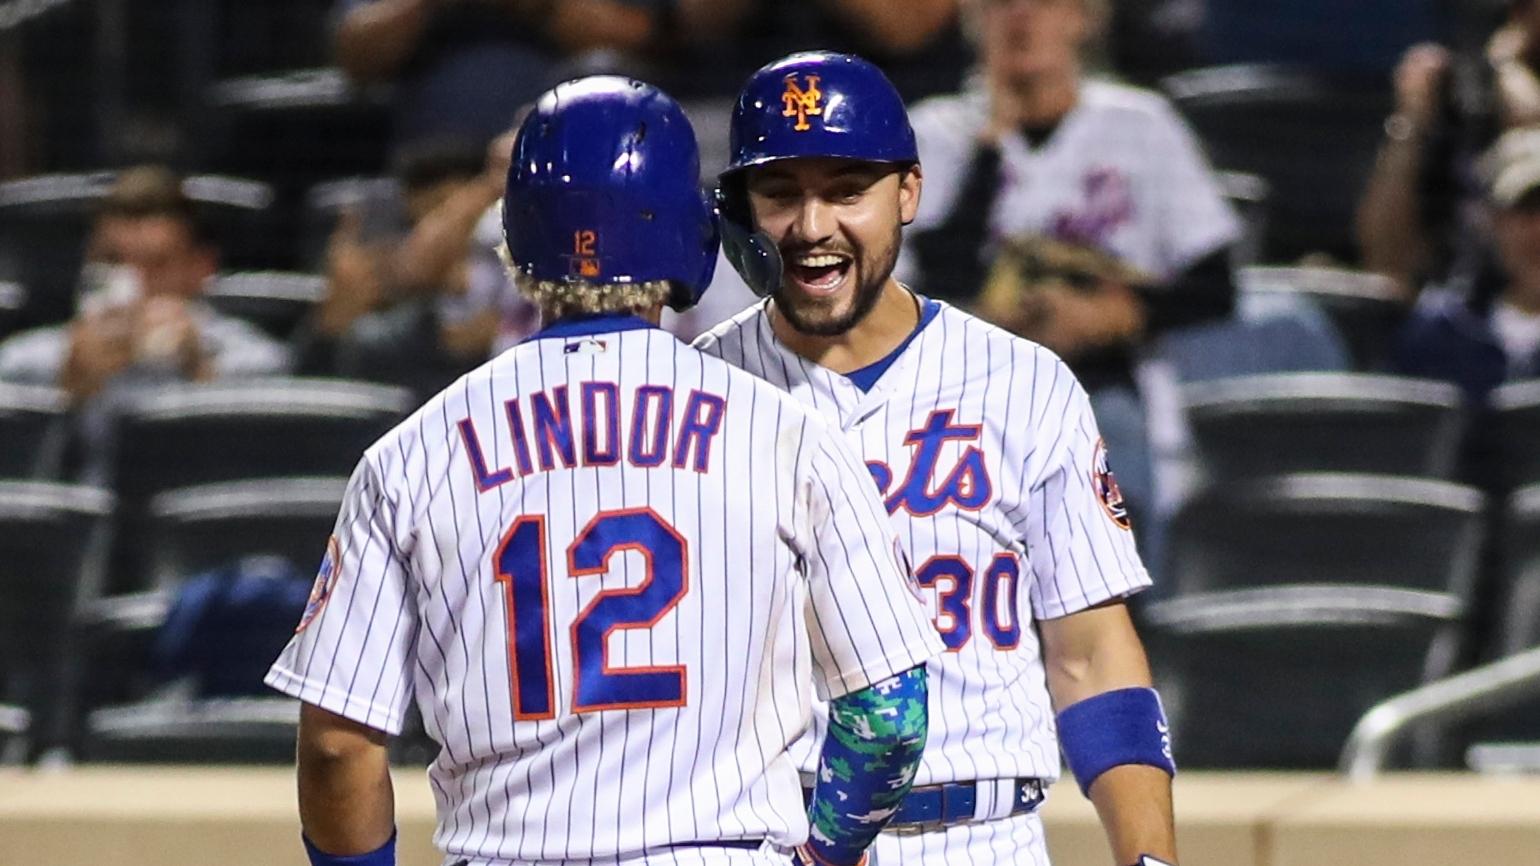 Sep 12, 2021; New York City, New York, USA; New York Mets shortstop Francisco Lindor (12) is greeted by right fielder Michael Conforto (30) after hitting his third home run of the game in the eighth inning against the New York Yankees at Citi Field. / Wendell Cruz-USA TODAY Sports